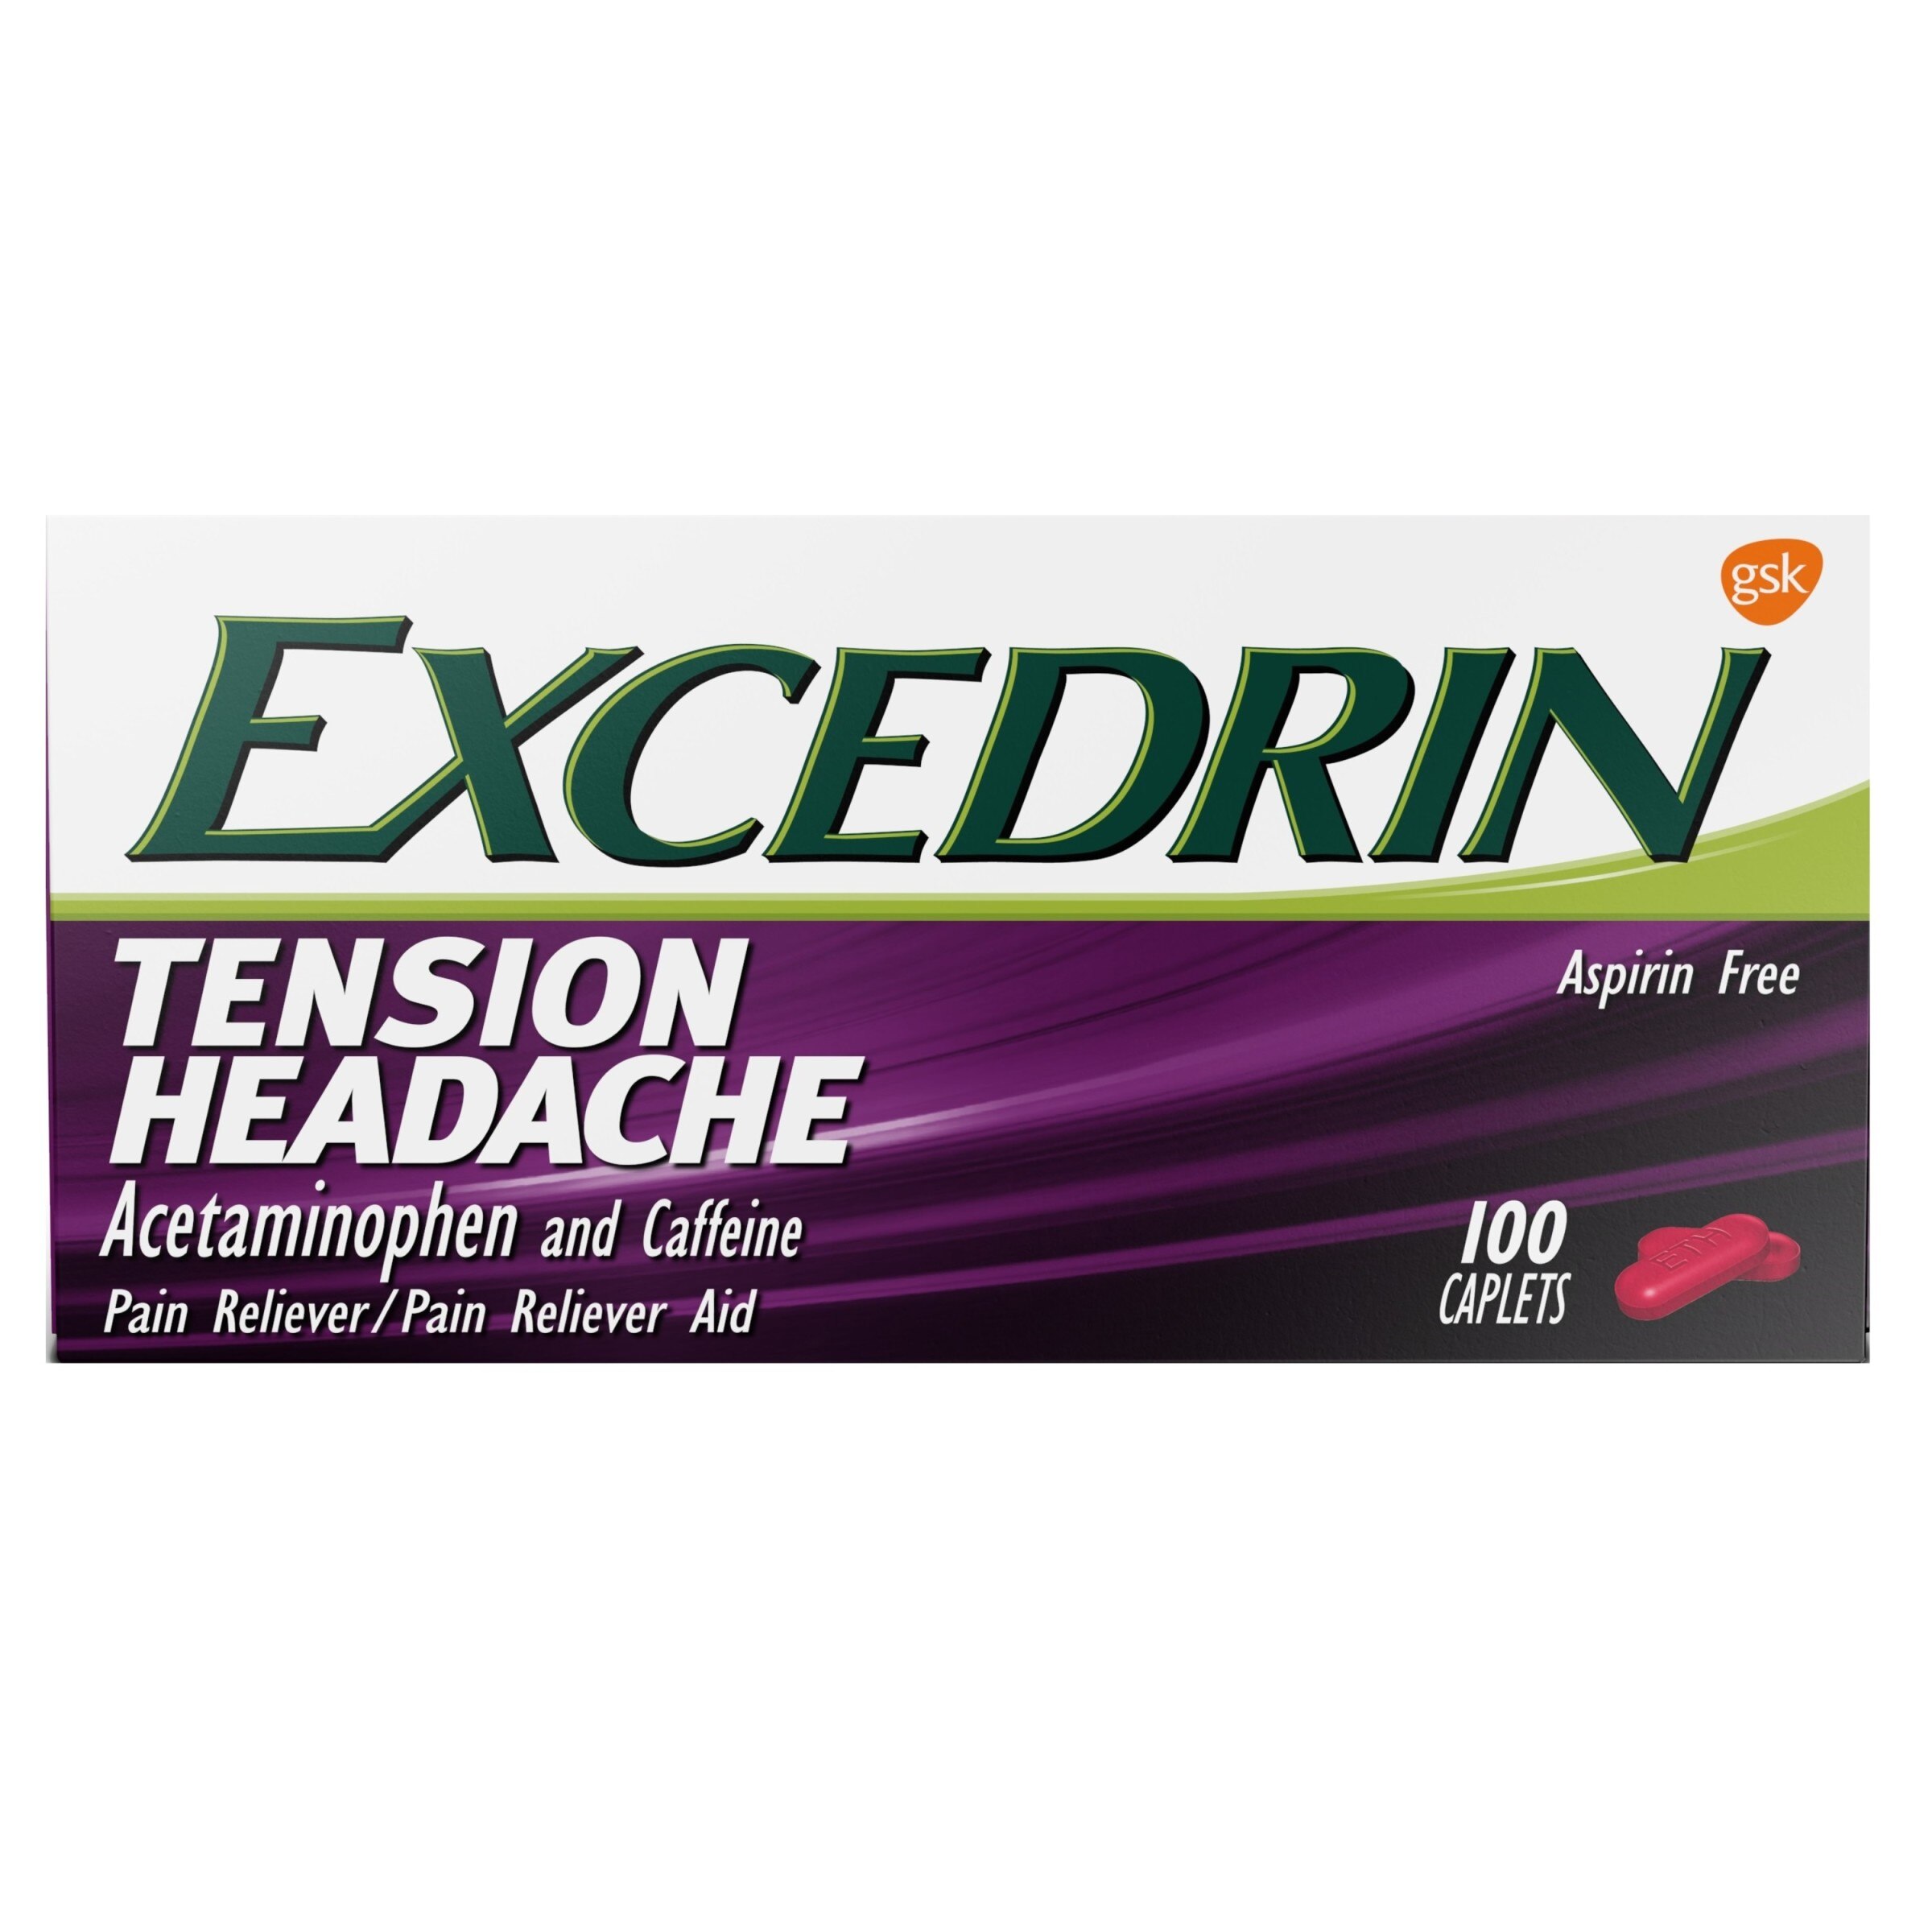 Excedrin Tension Headache Relief Caplets without Aspirin, 100 CT